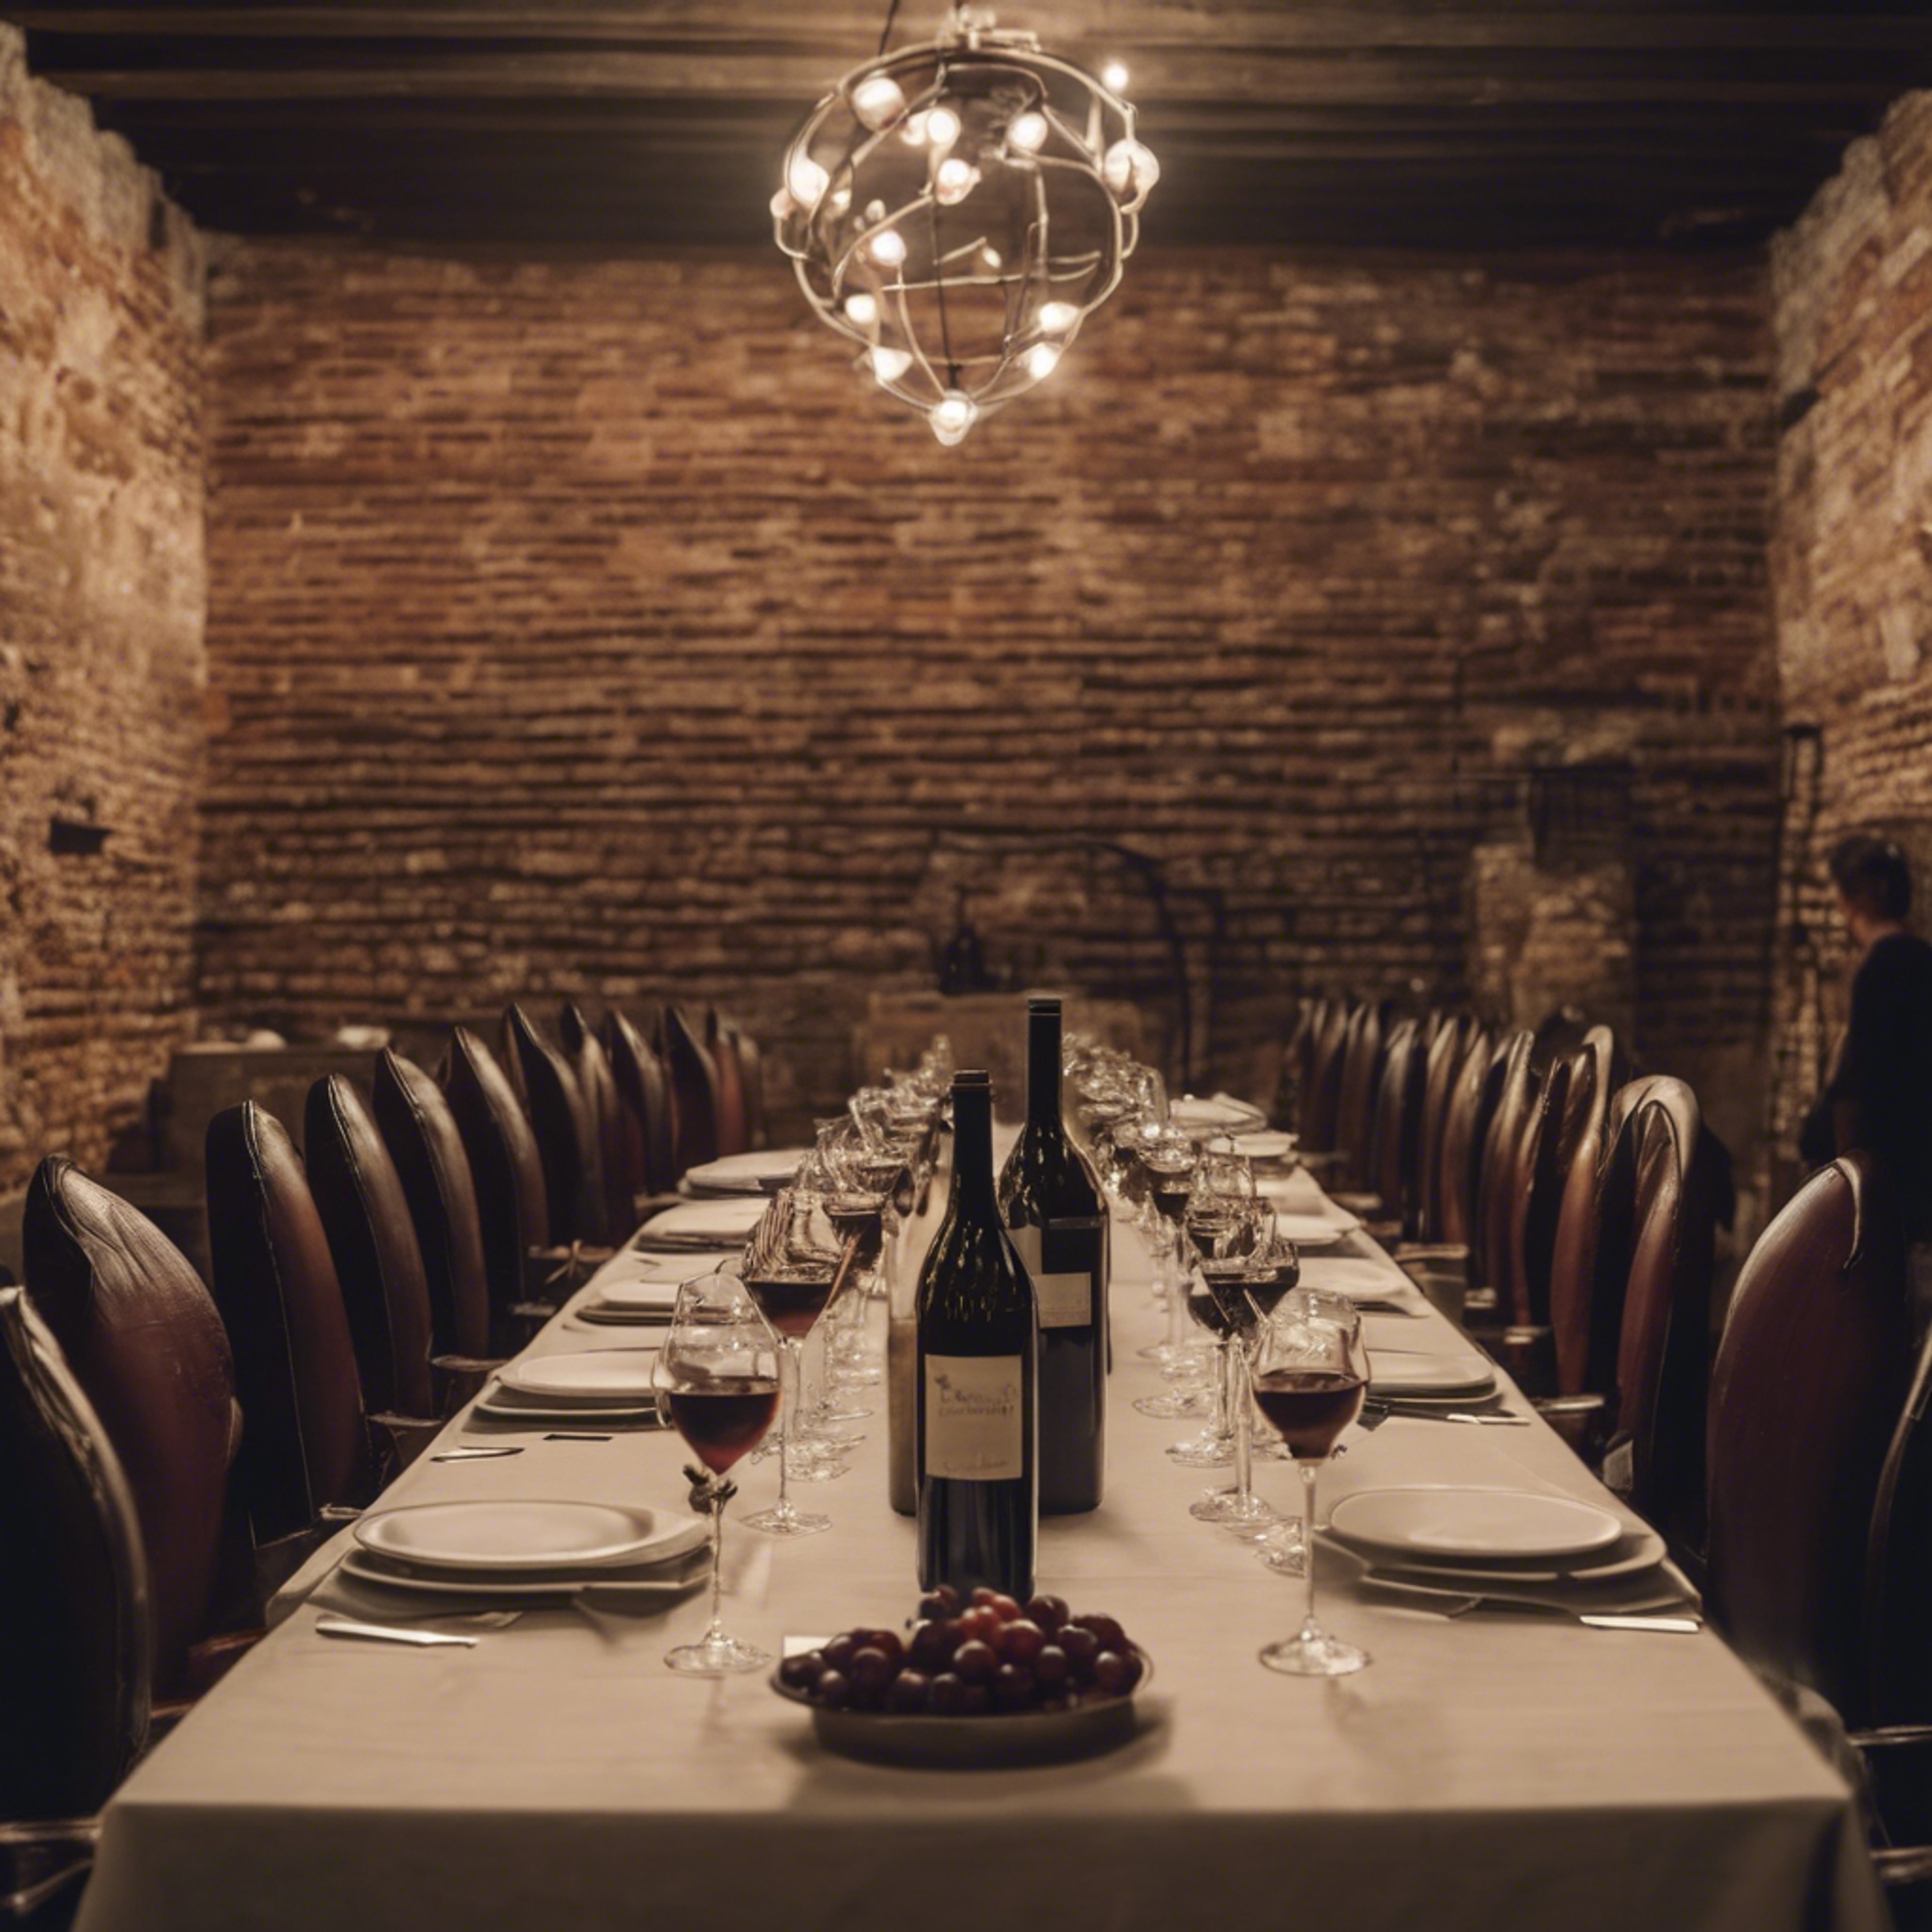 Sophisticated wine tasting party in a brick-walled cellar filled with aged wines. Wallpaper[5969b4d831274a8f992f]